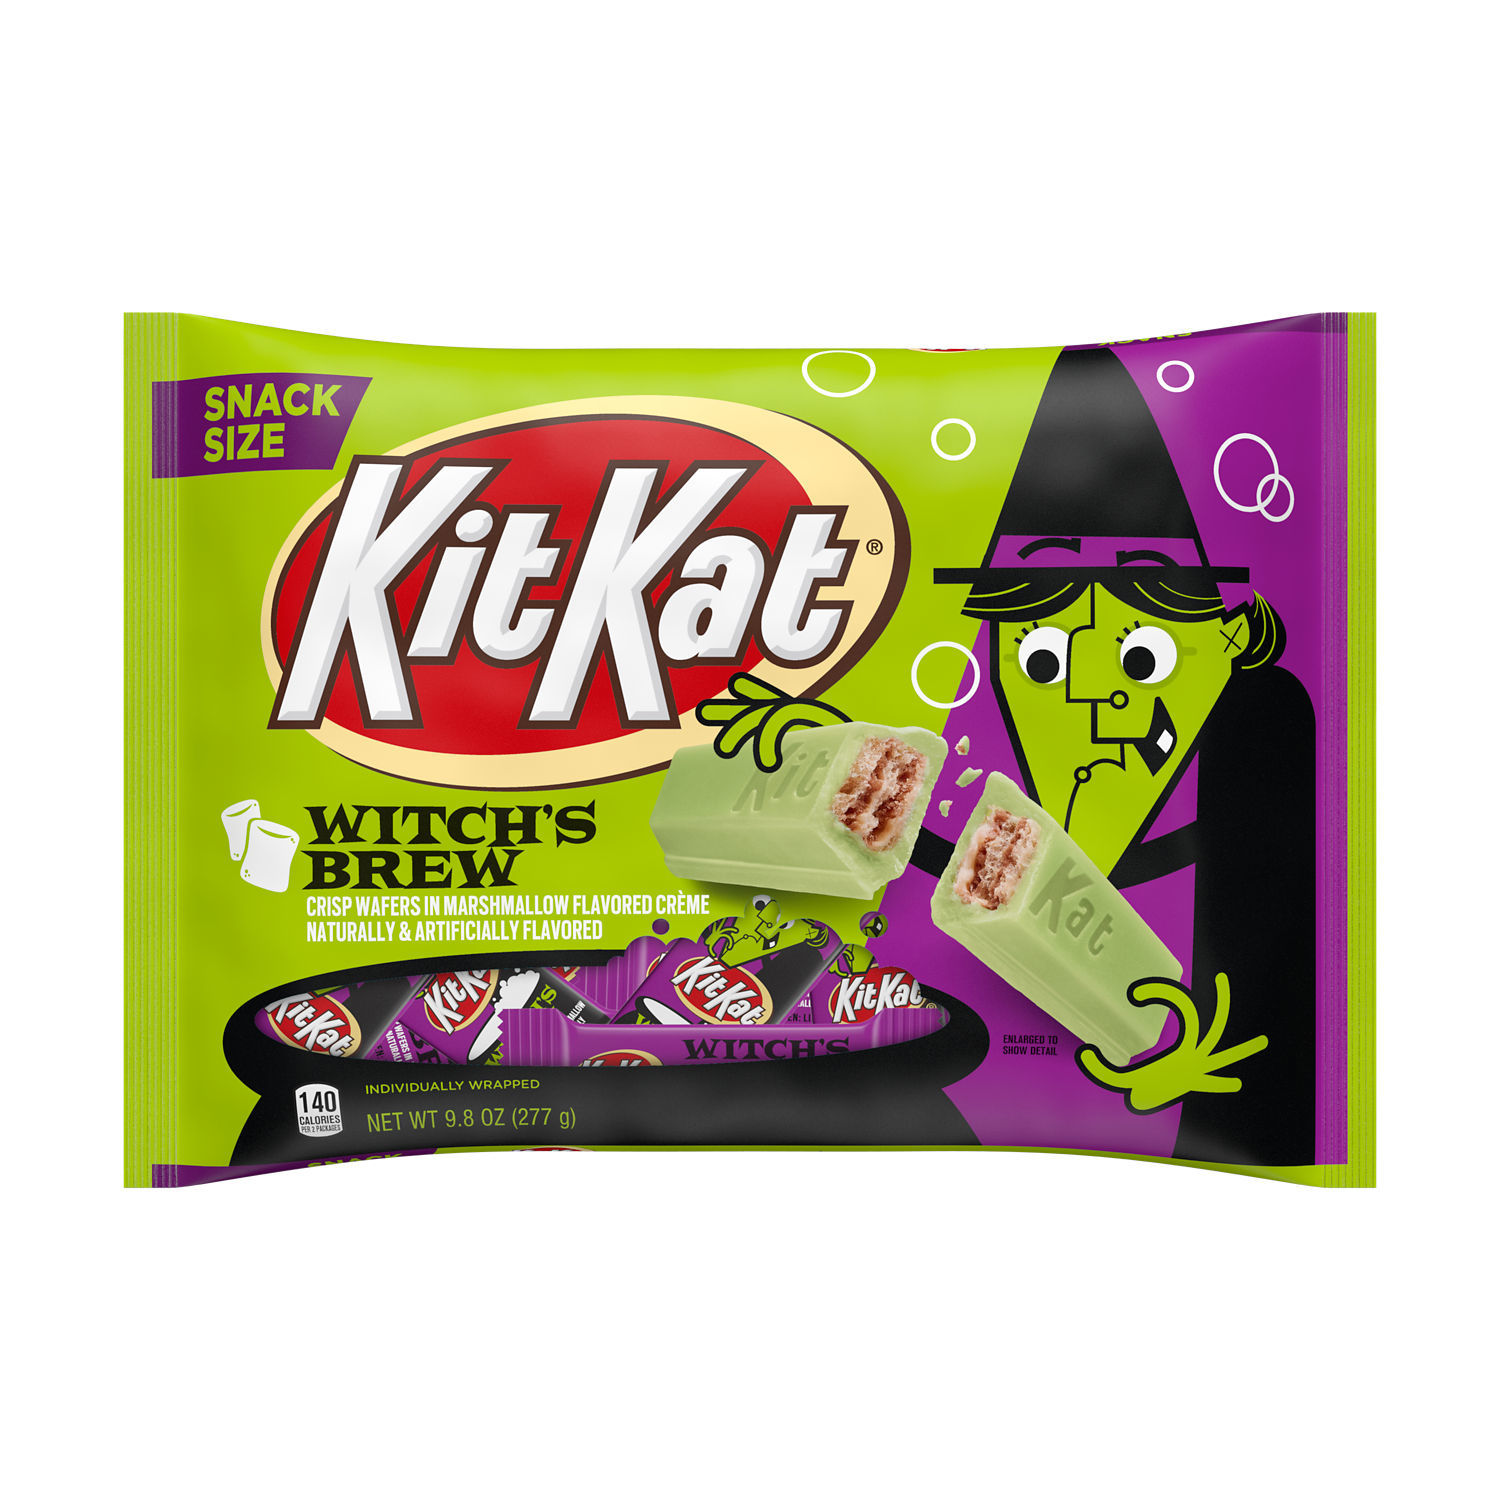 Kit Kat® Witch's Brew Marshmallow Creme Snack Size, Halloween Wafer Candy Bars Bag, 9.8 oz - image 1 of 7